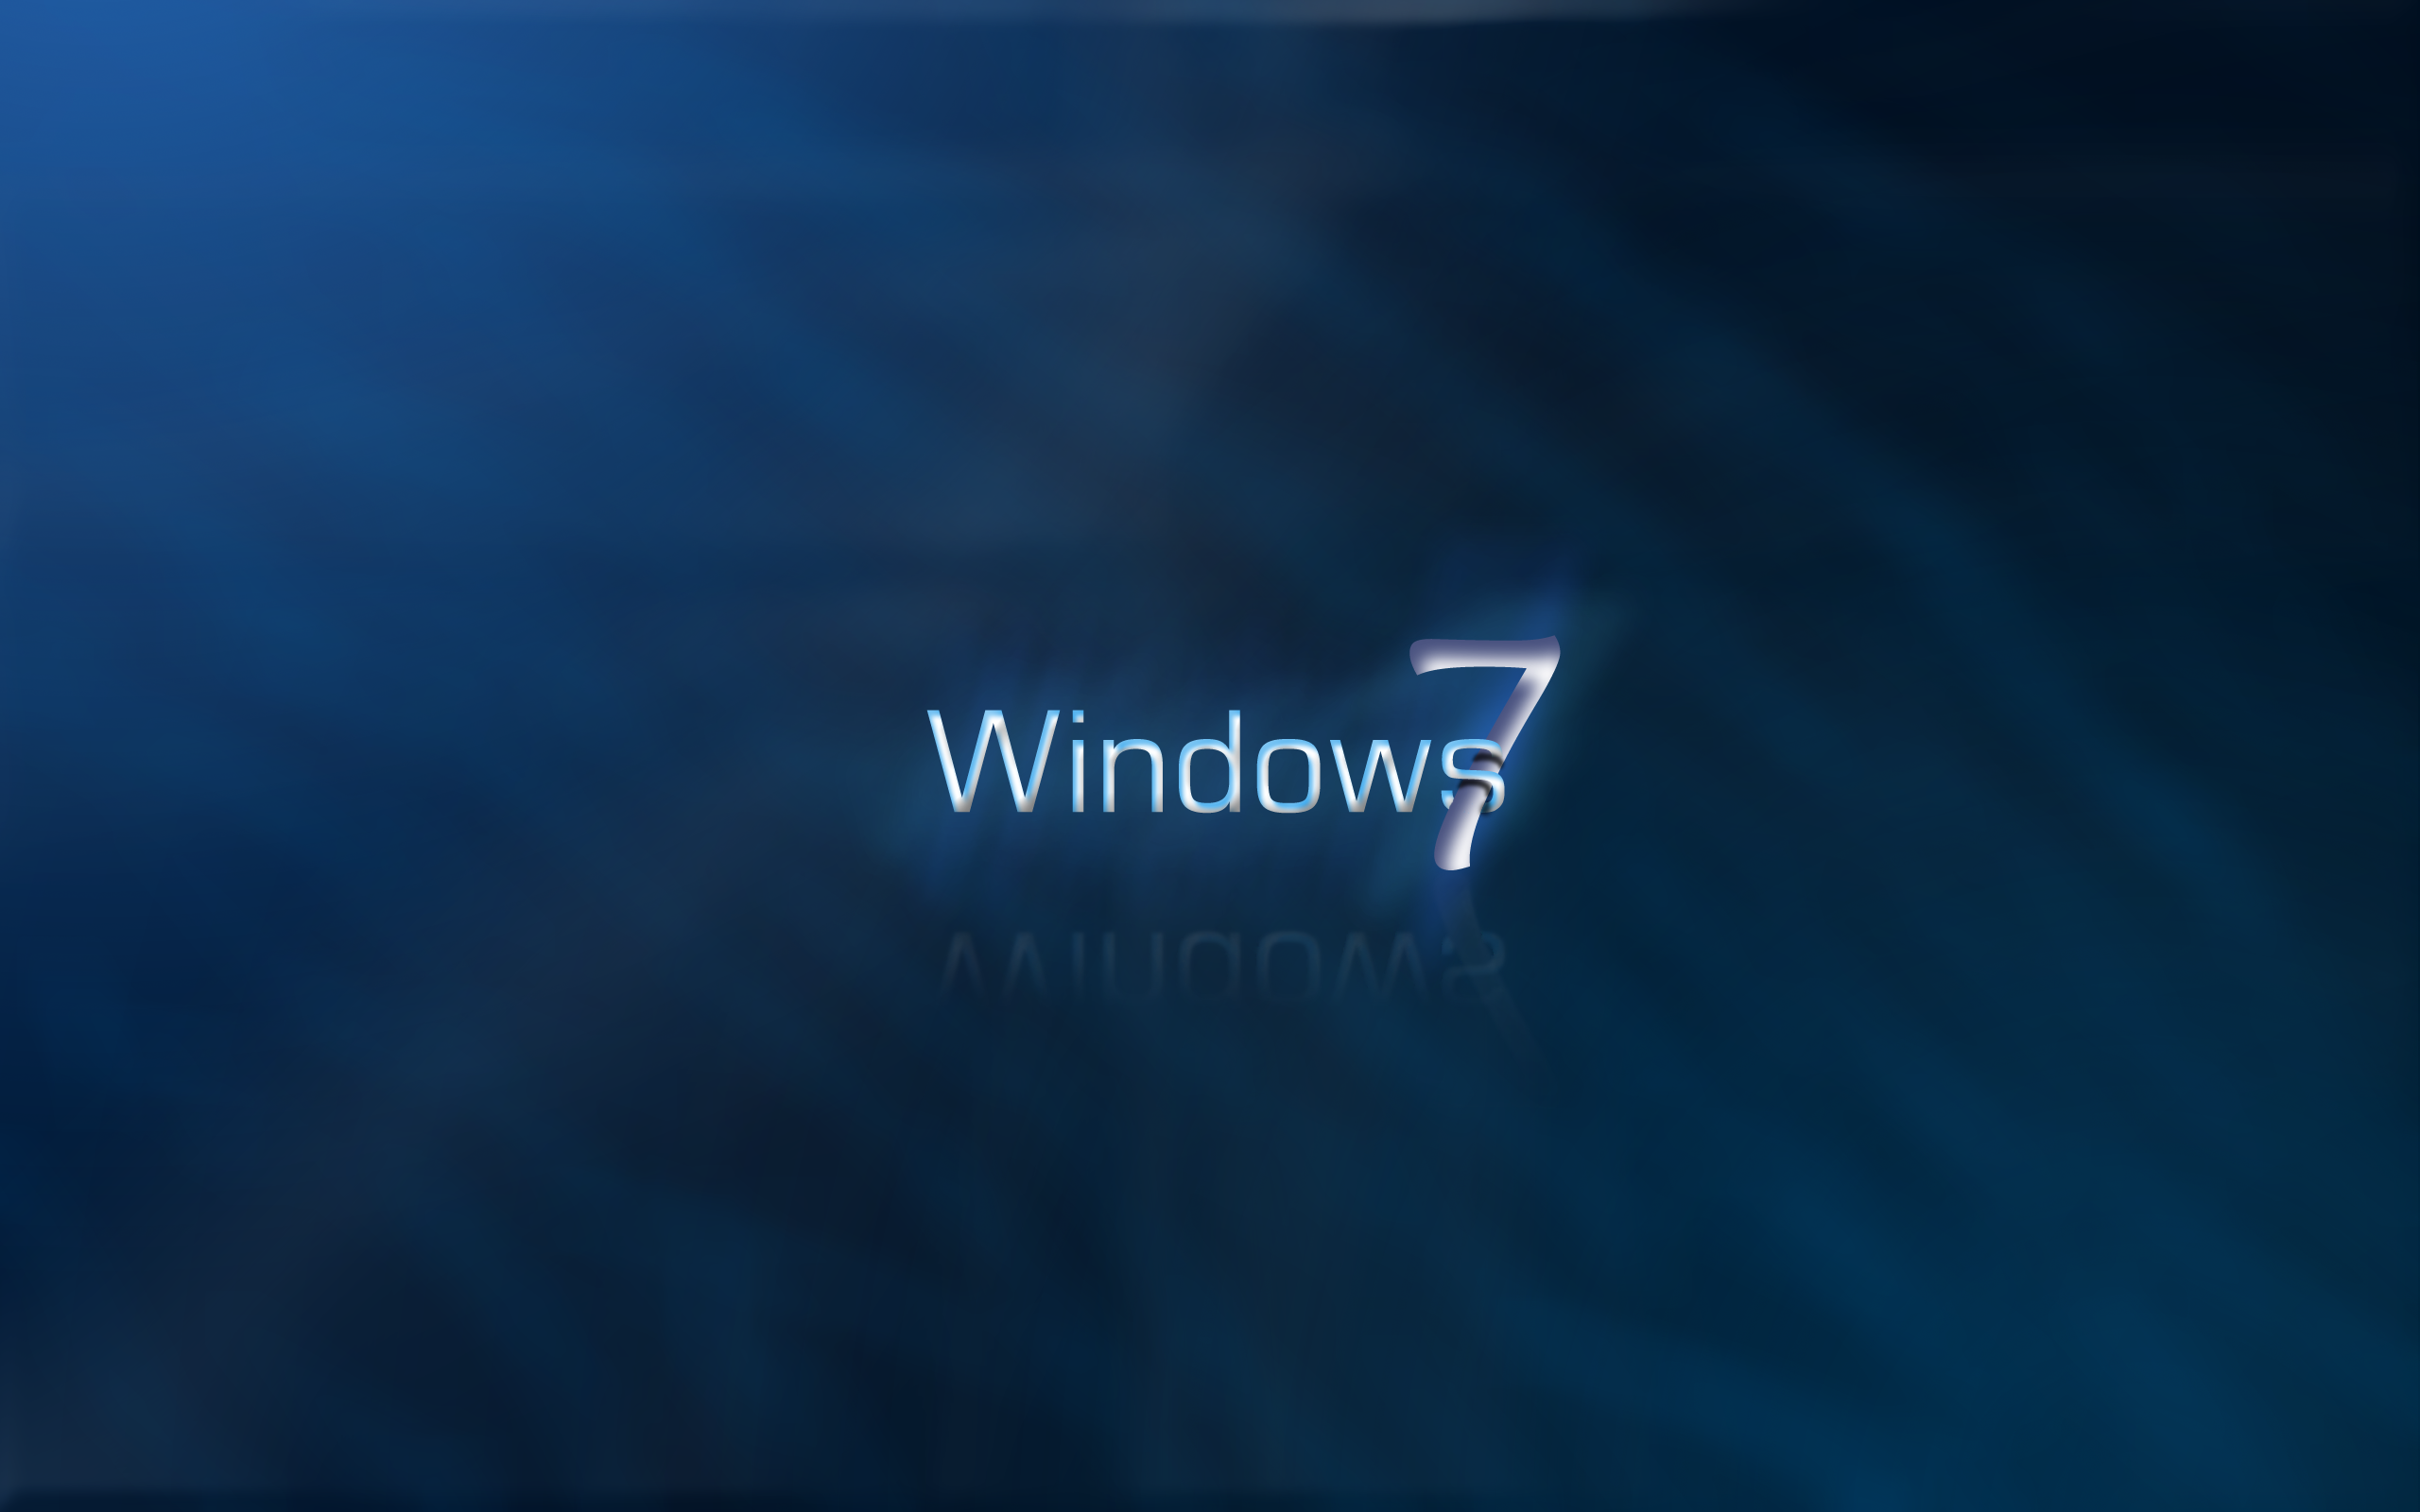 To buy new Windows 7 at great price check this out